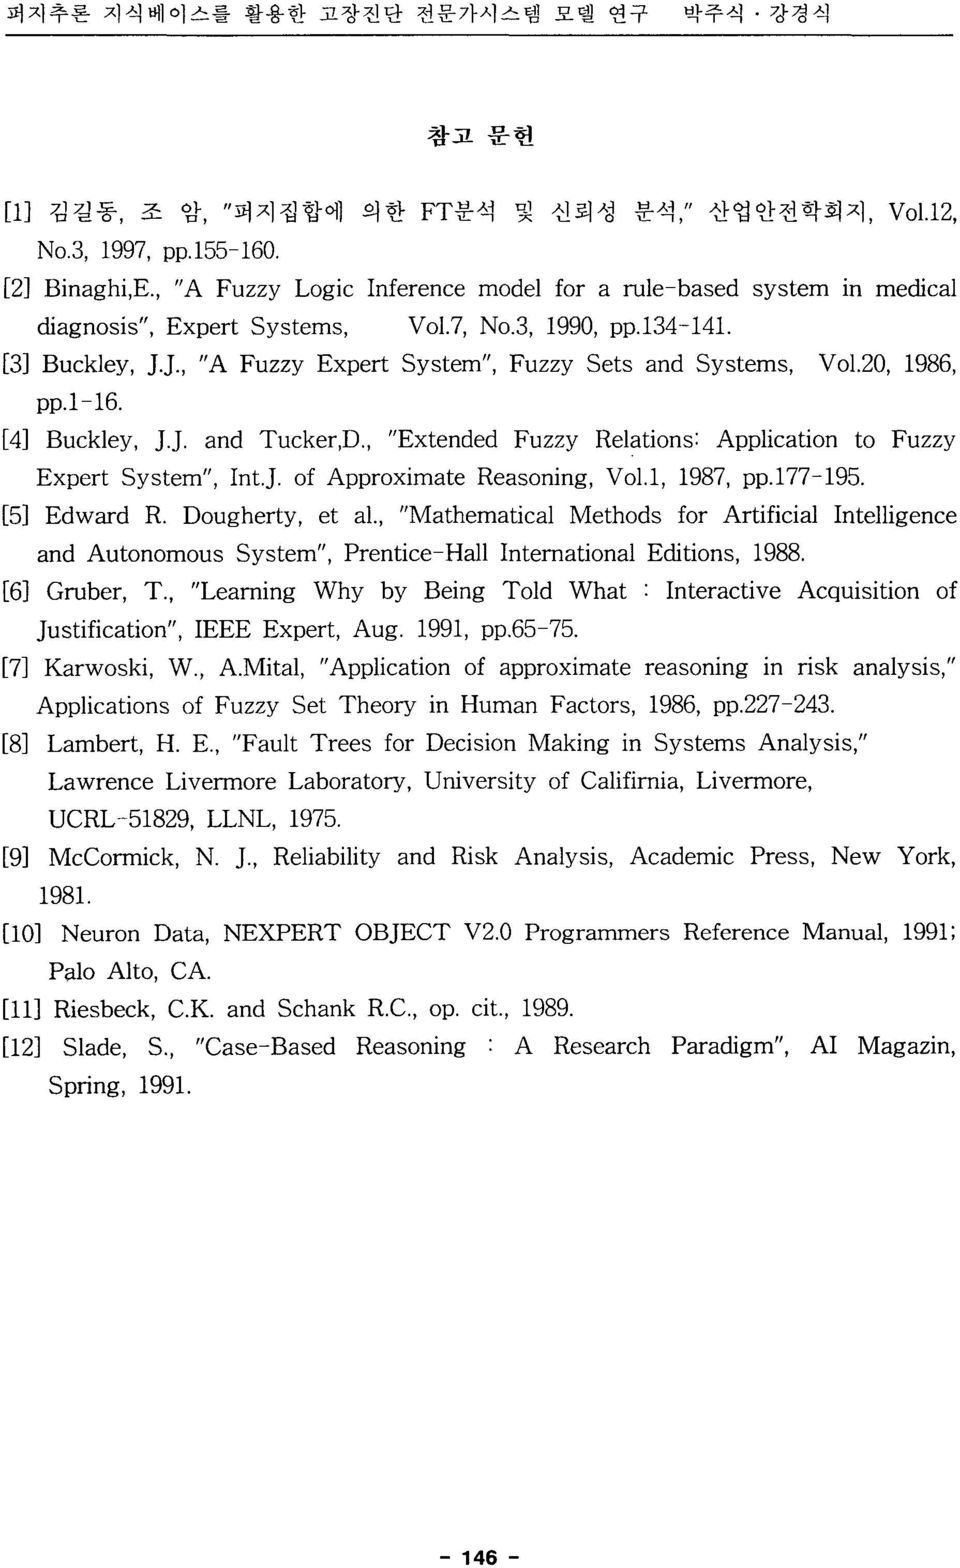 20, 1986, pp.l-16. [4] Buckley, ].]. and Tucker,D., "Extended Fuzzy Relations: Application to Fuzzy Expert System", Int.]. of Approximate Reasoning, Vol.l, 1987, pp.177-195. [5] Edward R.